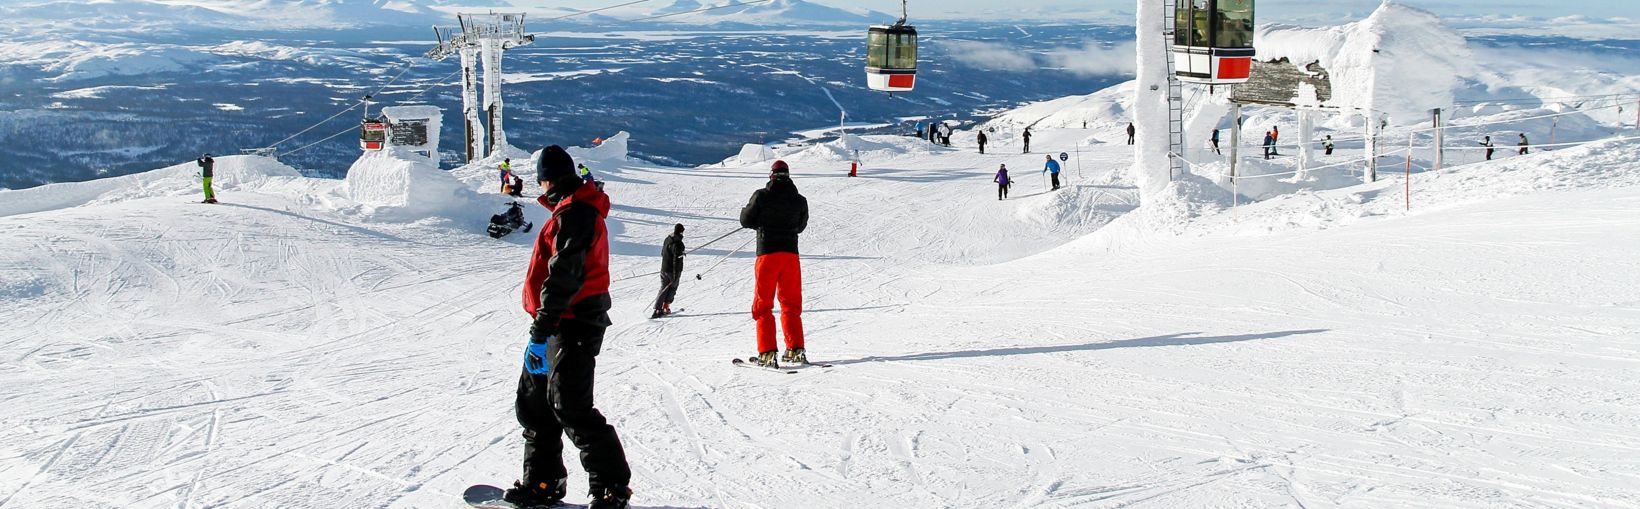 Skiers on the top of a piste